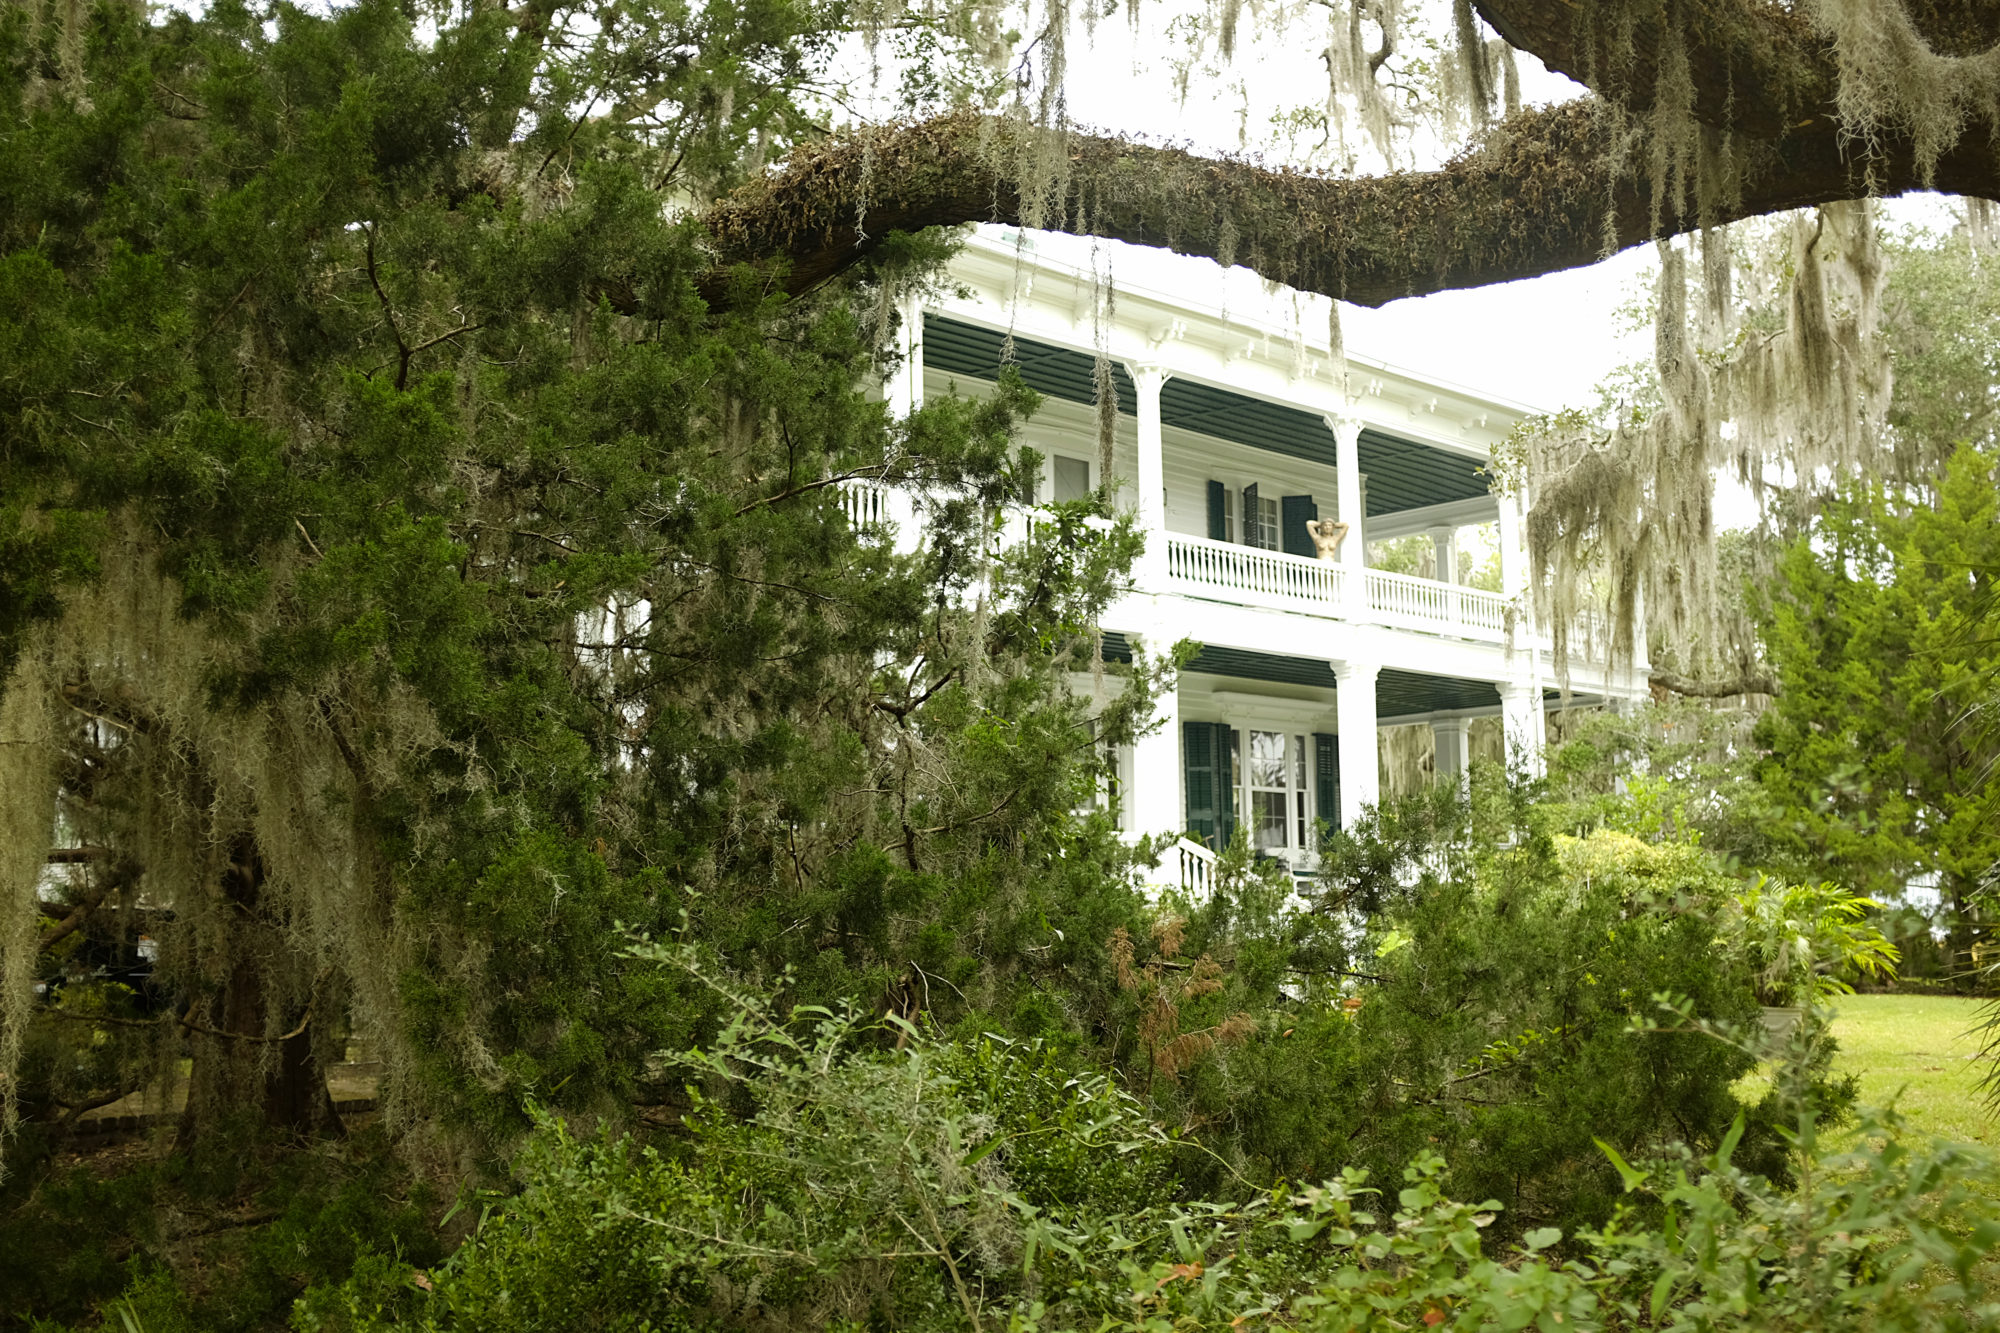 A historic home in Beaufort with a mermaid statue